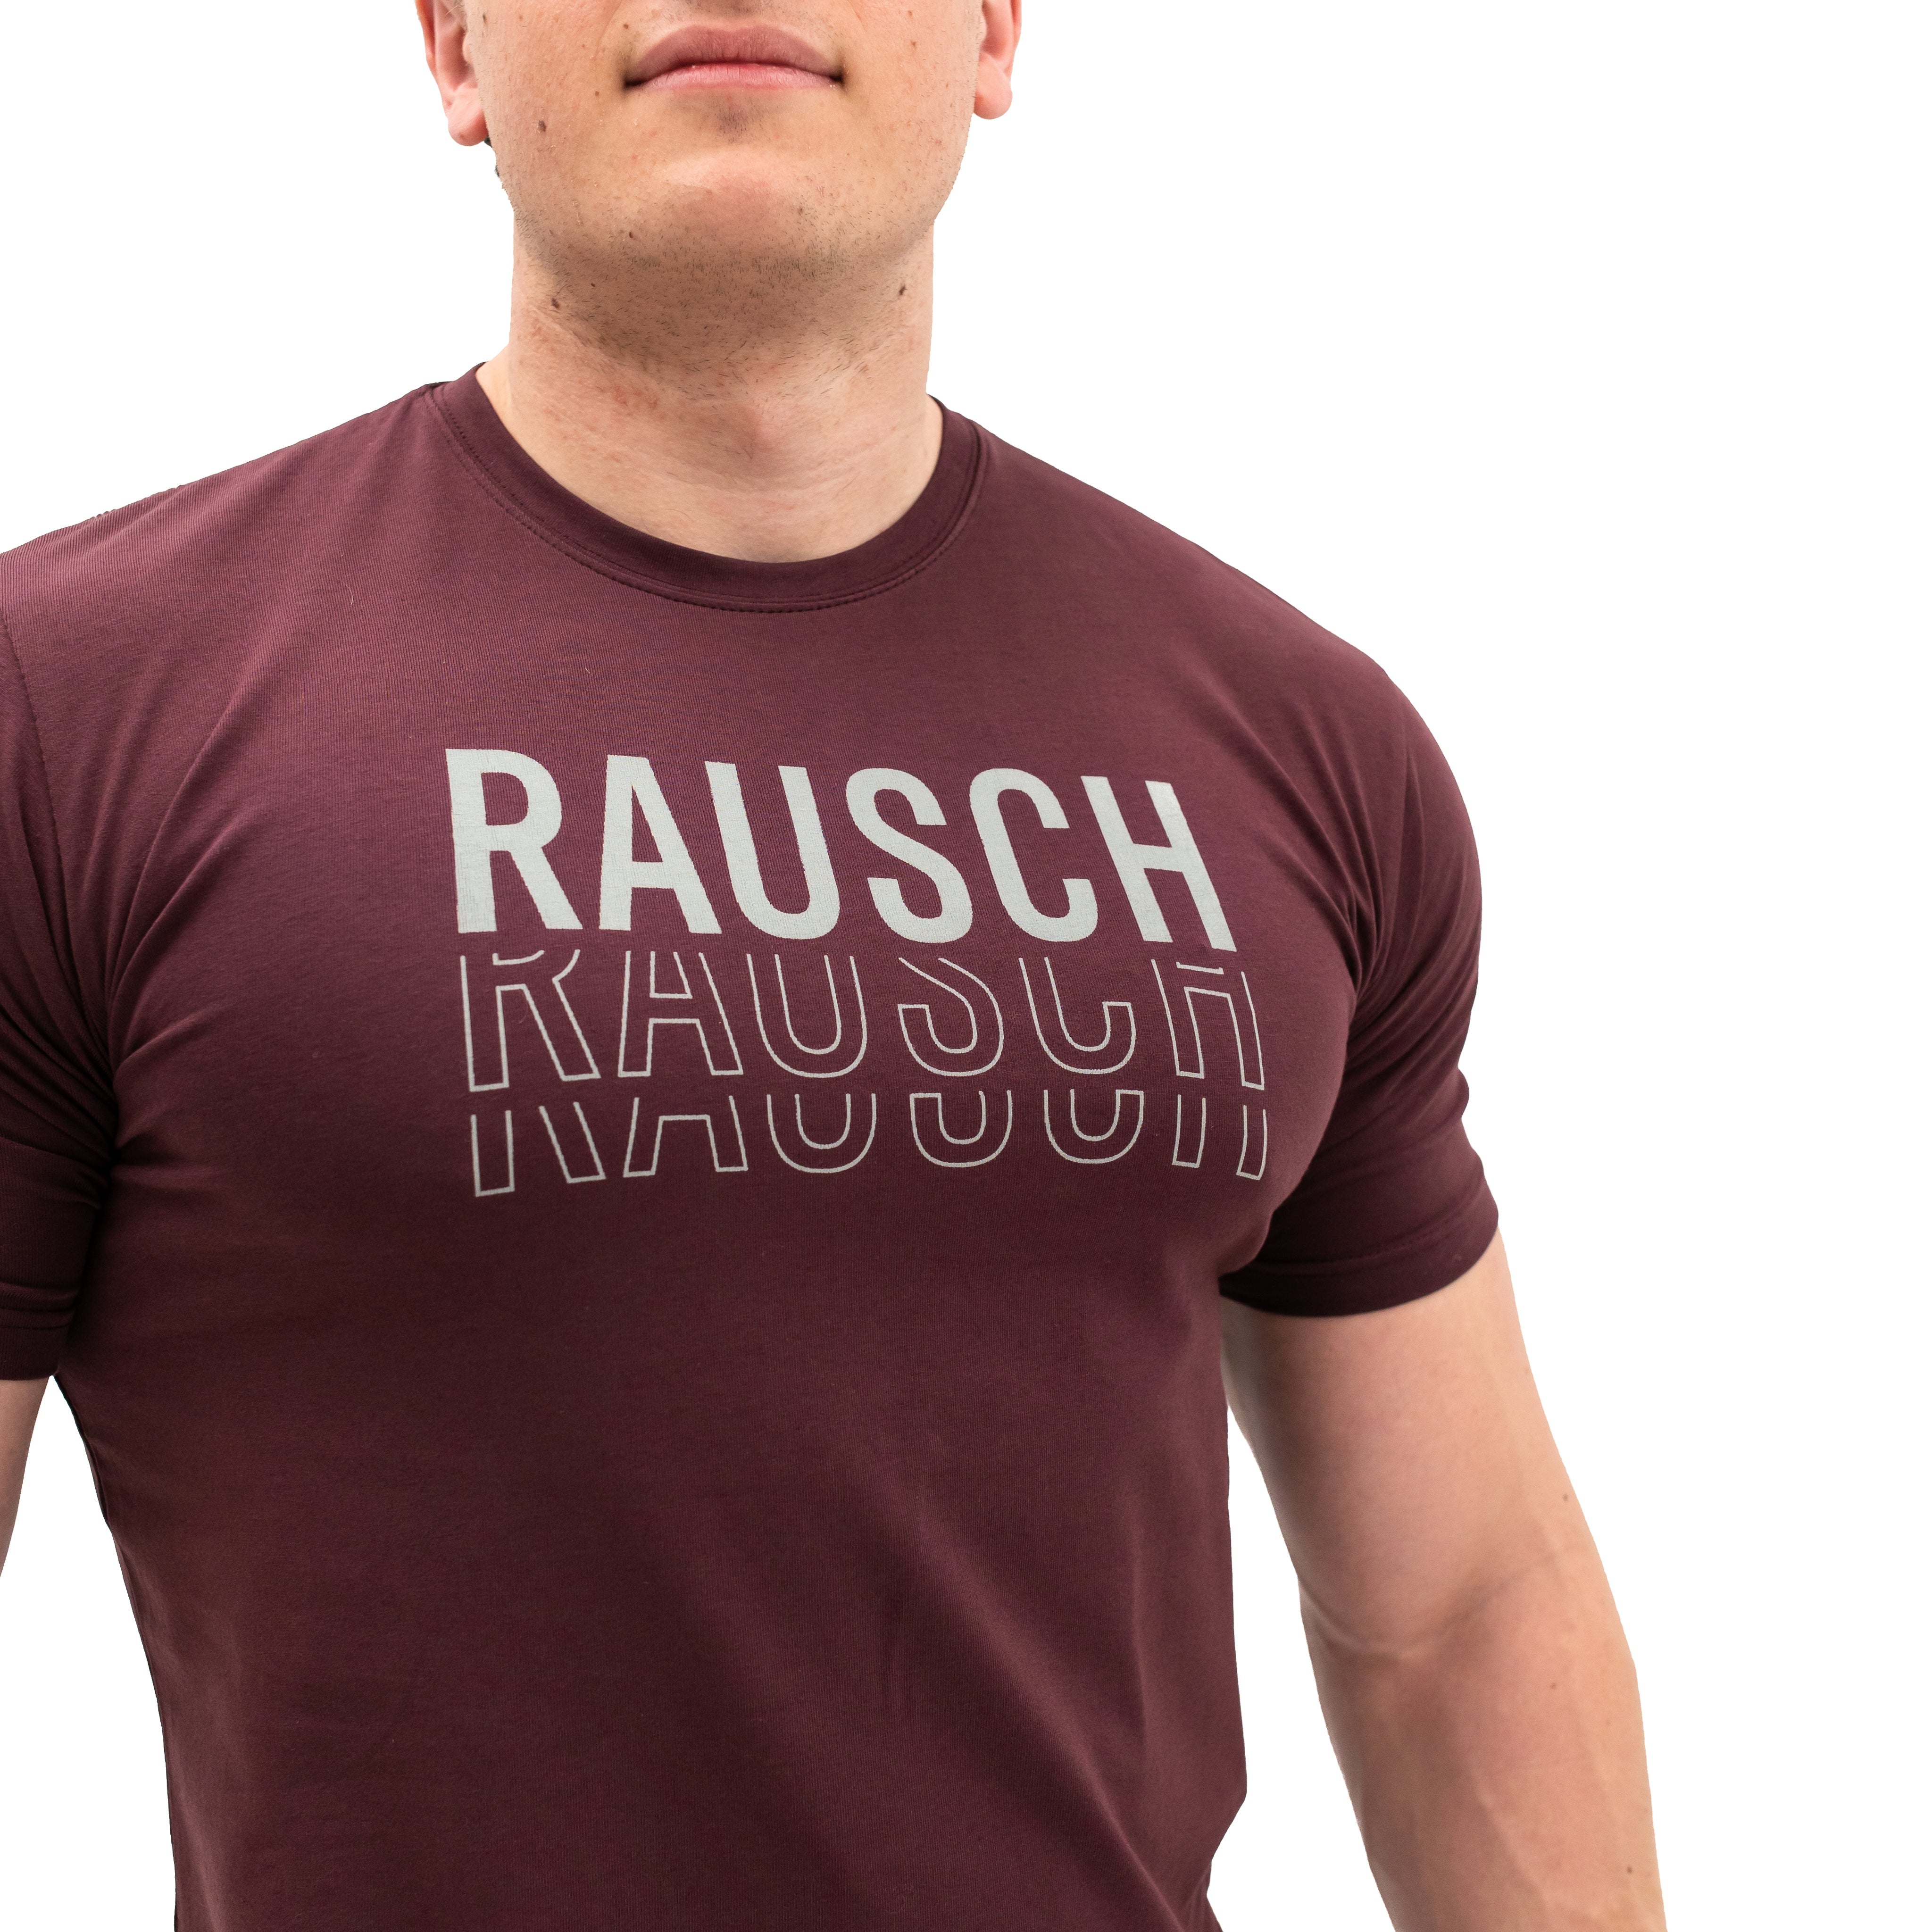 Rausch Bar Grip T-shirt, great as a squat shirt. Purchase Rausch Bar Grip t-shirt from A7 UK. Purchase Climb Bar Grip Shirt Europe from A7 Europe. No more chalk and no more sliding. Best Bar Grip T shirts, shipping to UK and Europe from A7 UK. A7UK has the best Powerlifting apparel for all your workouts. Available in UK and Europe including France, Italy, Germany, the Netherlands, Sweden and Poland.